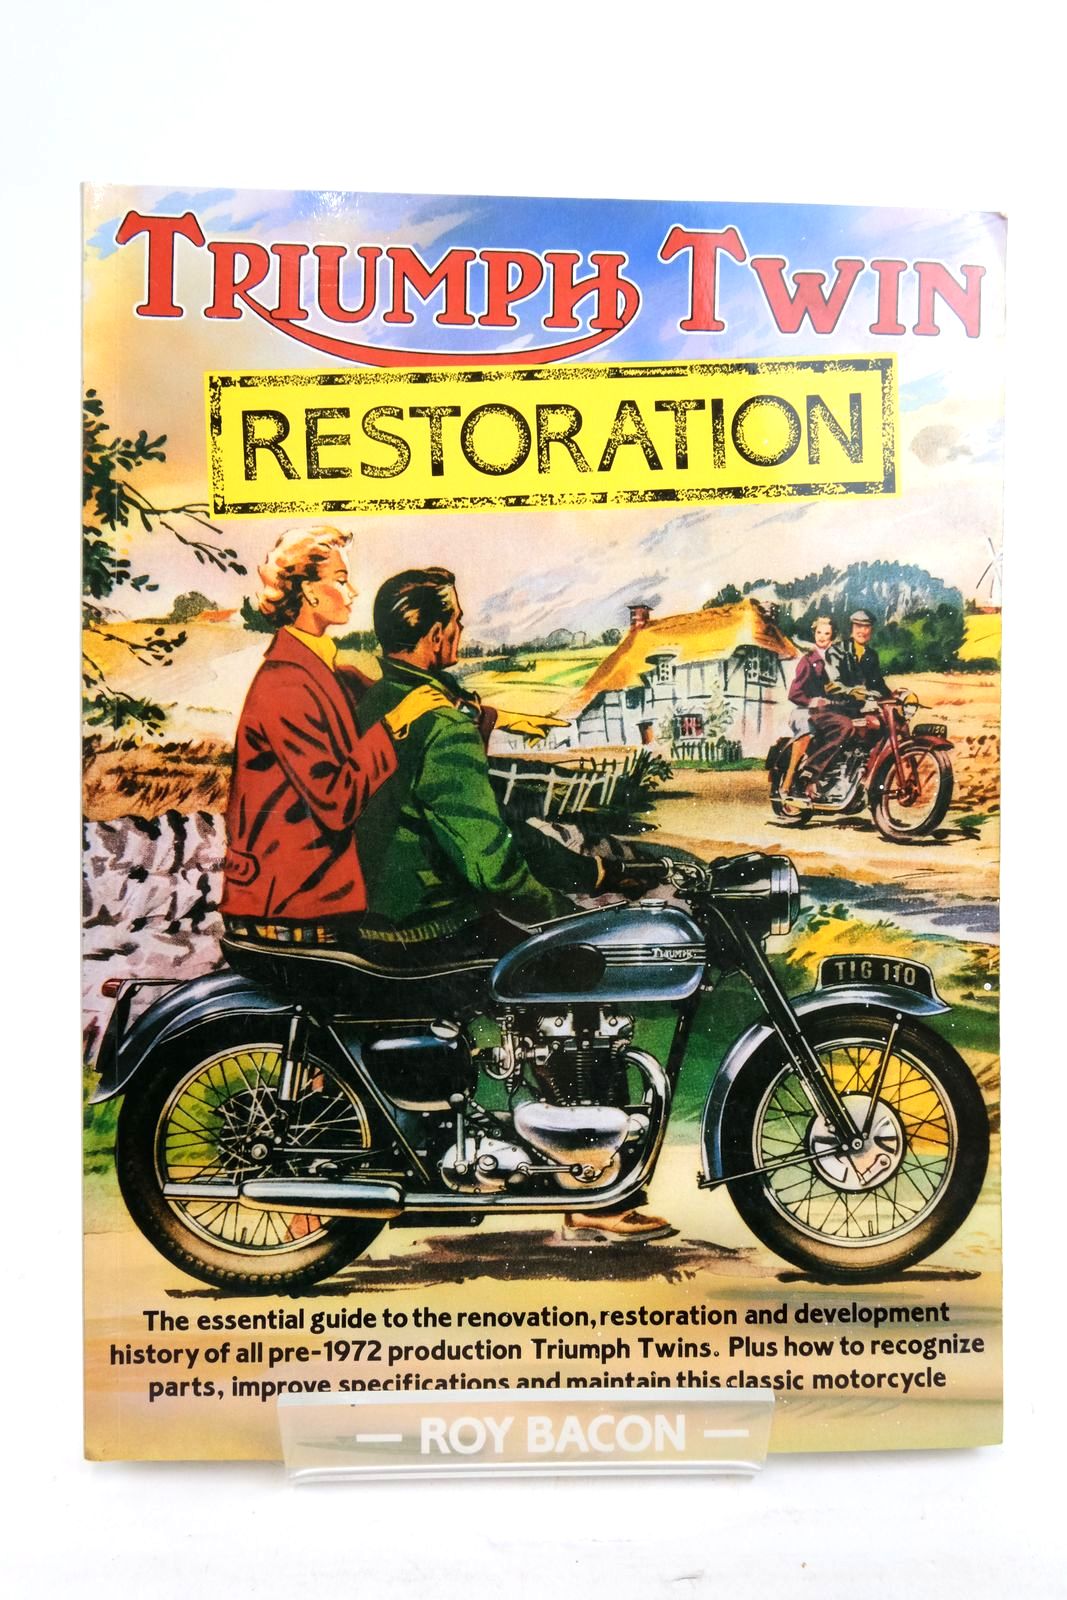 Photo of TRIUMPH TWIN RESTORATION written by Bacon, Roy published by Menoshire (STOCK CODE: 2137522)  for sale by Stella & Rose's Books